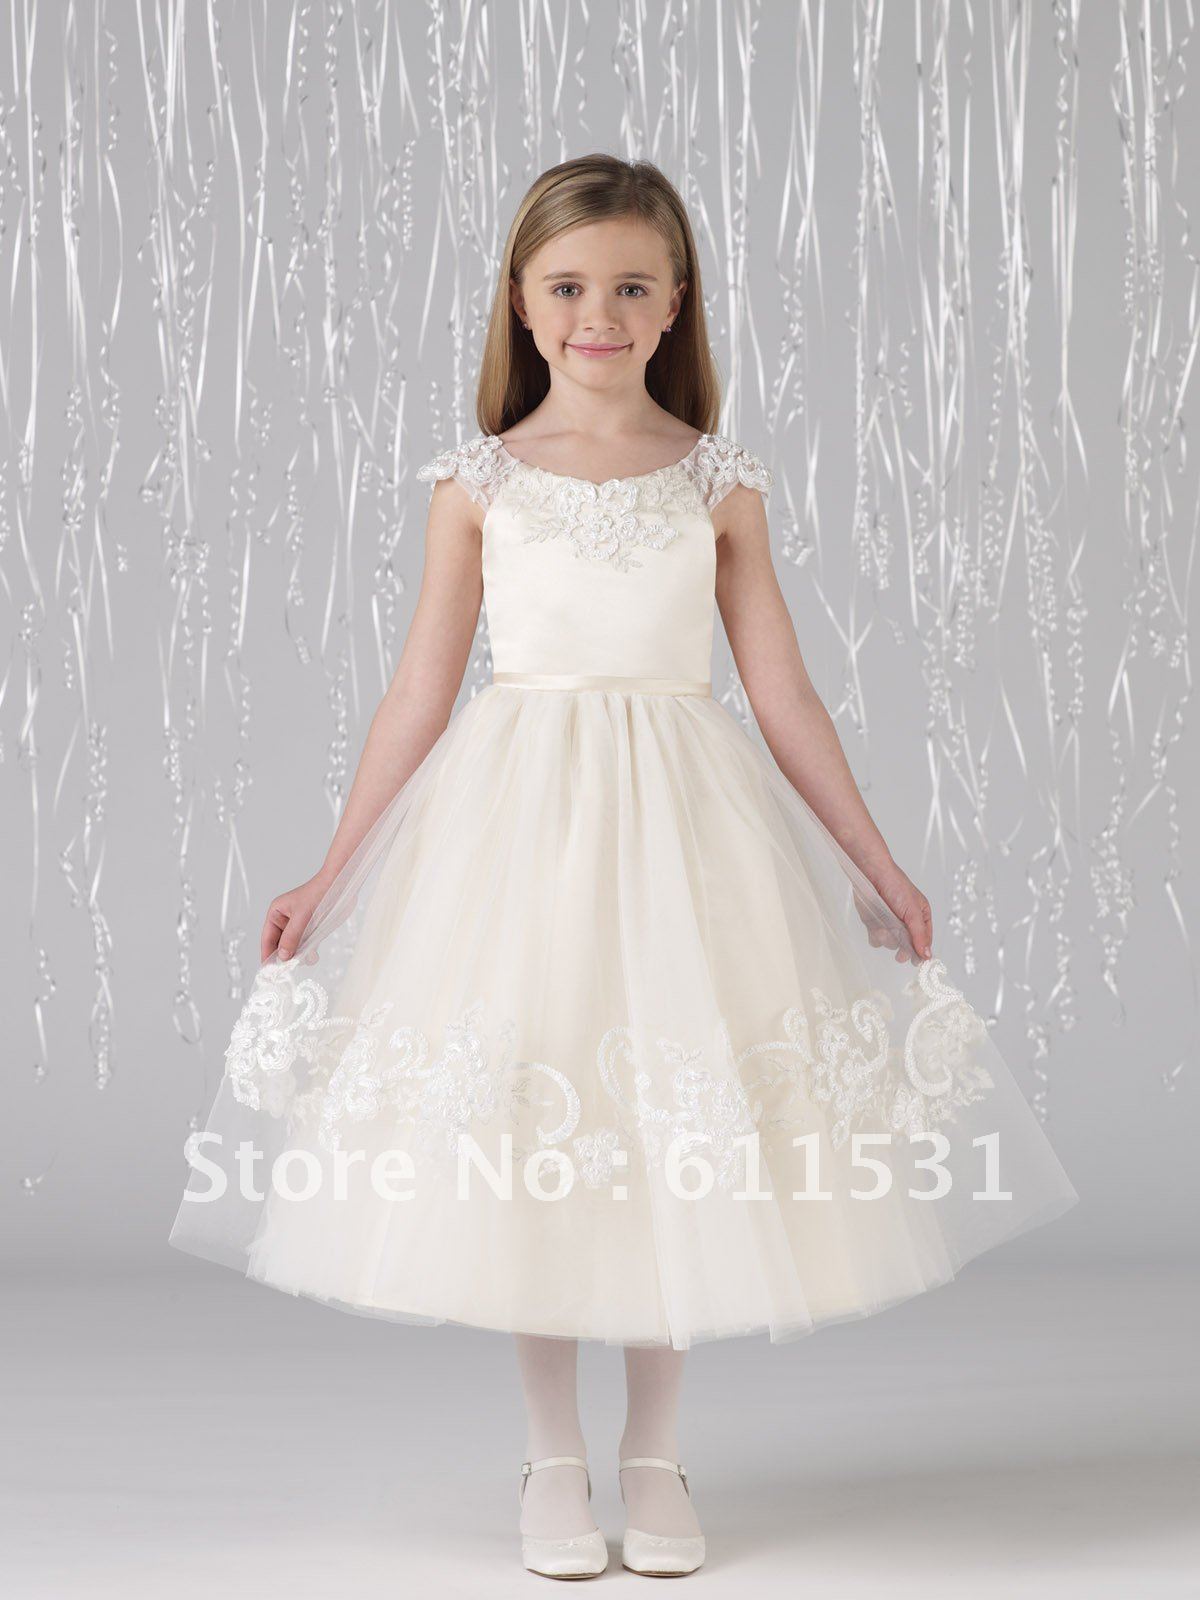 New Arrival 2012 !!Lovely Princess Mid Calf Appliques Ankle Length Satin Flower Girl Dresses Free Shipping Custom Made